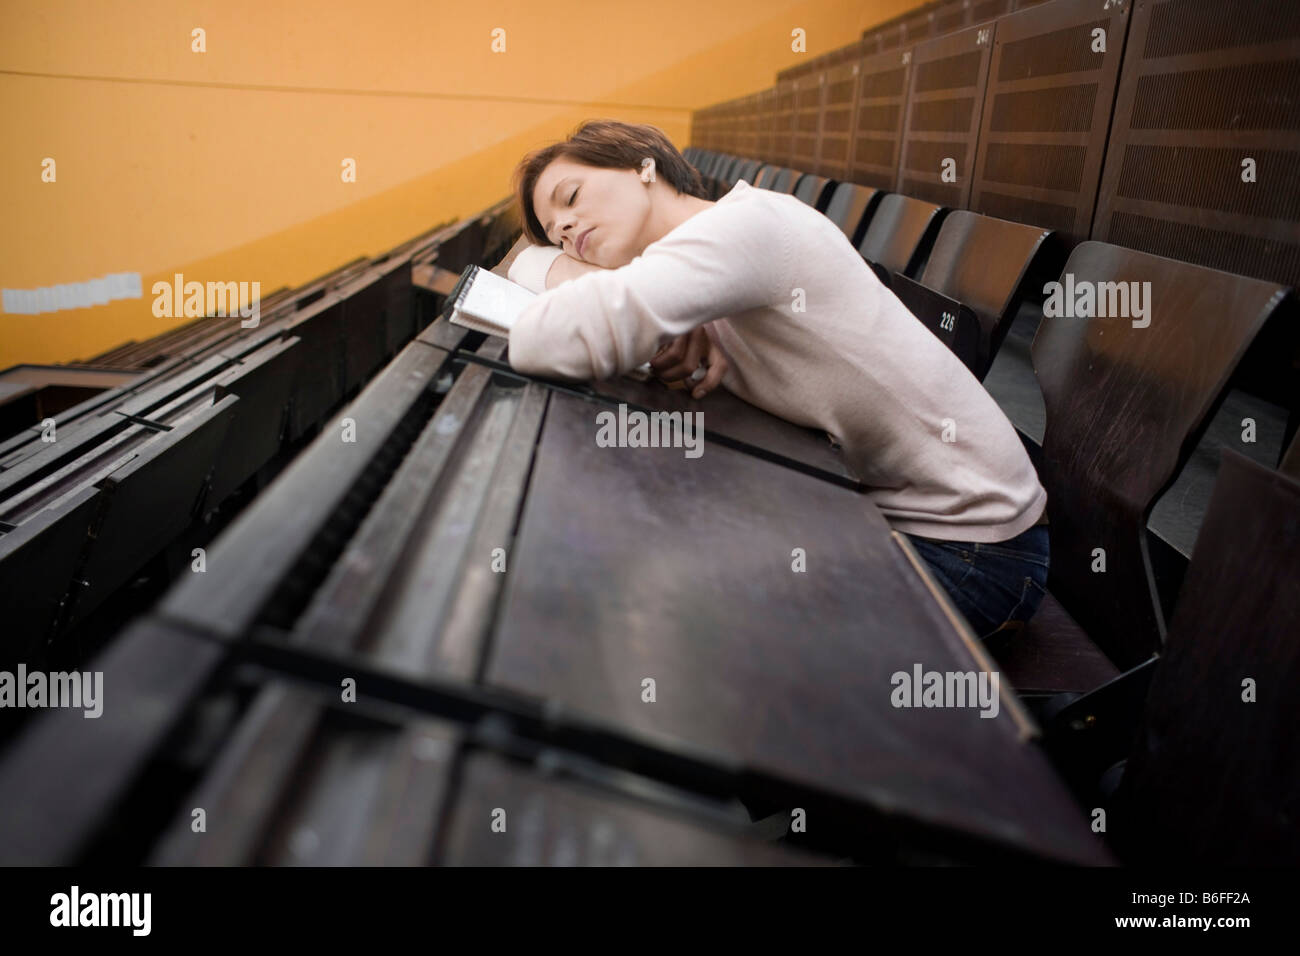 Female student in the lecture hall, sleeping Stock Photo